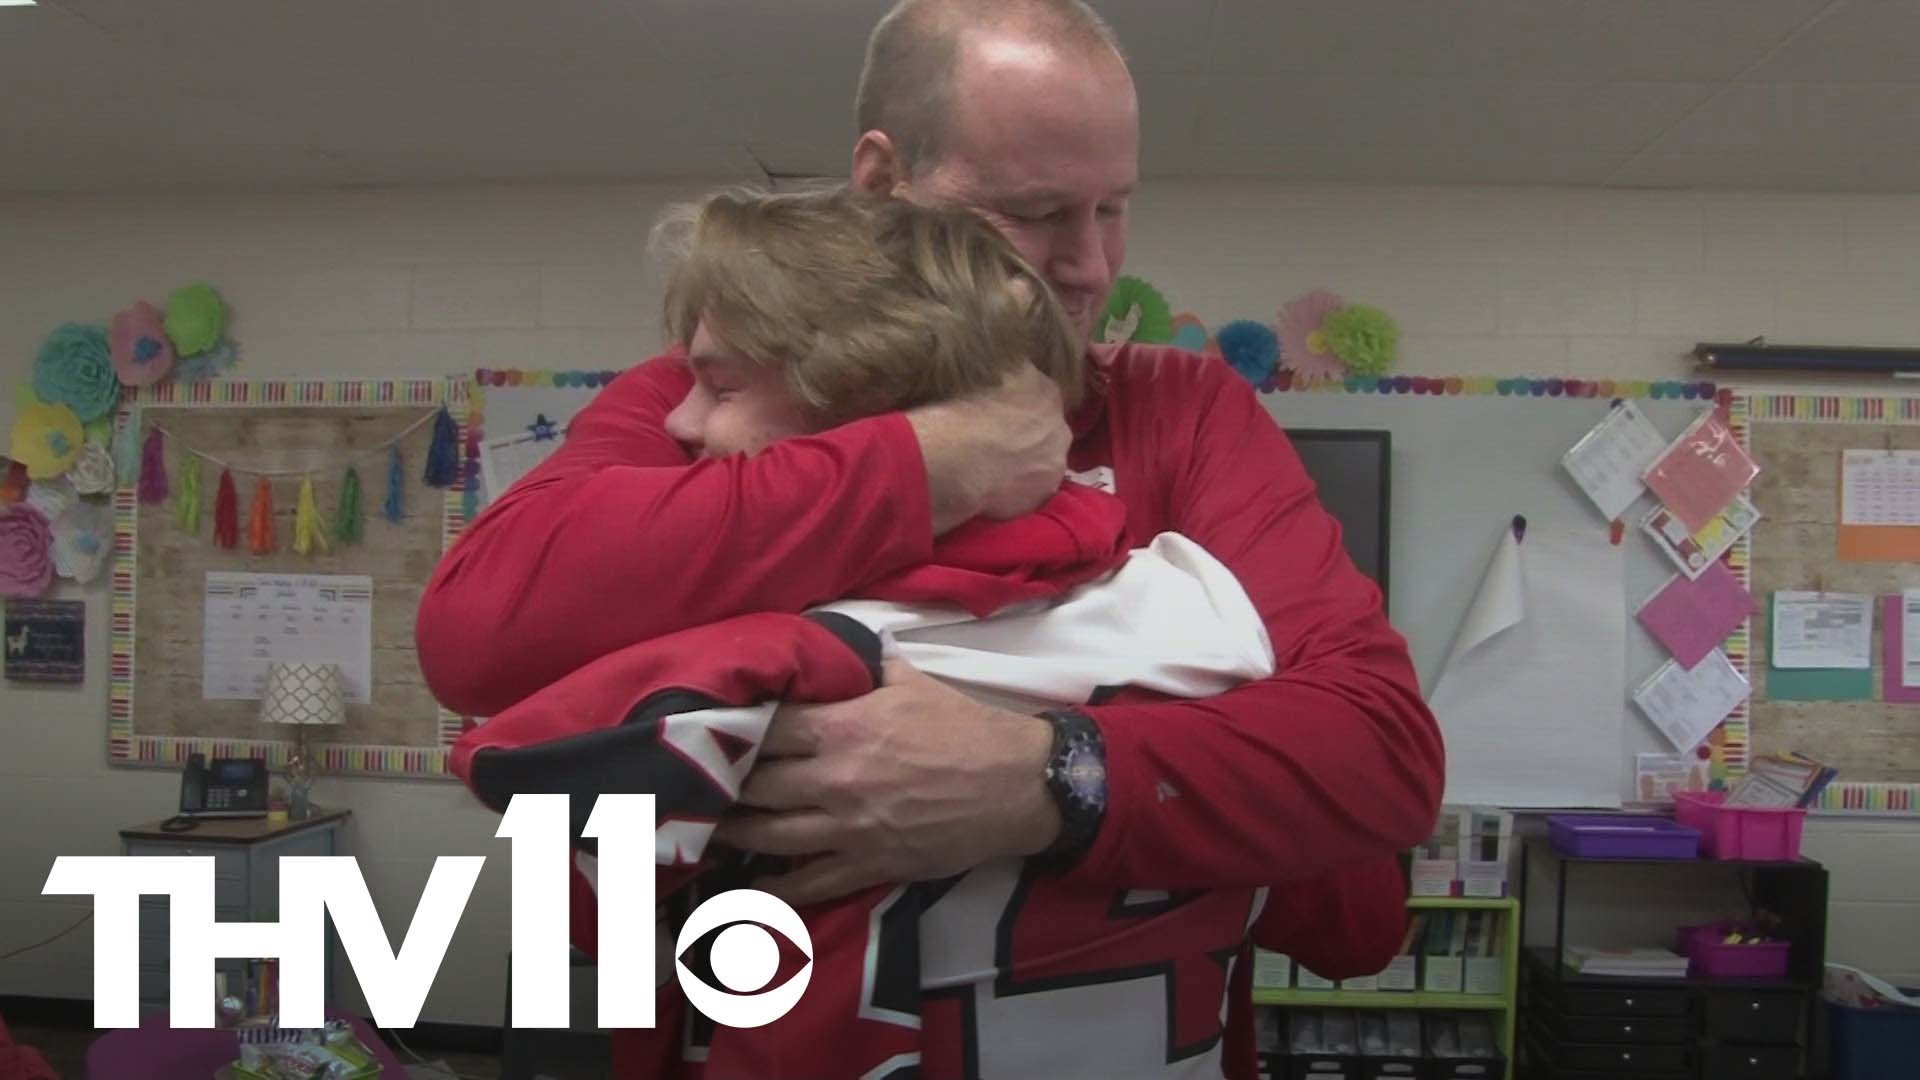 There's a growing tradition in Cabot of surprising the teacher who had the biggest impact on students with their senior jersey.